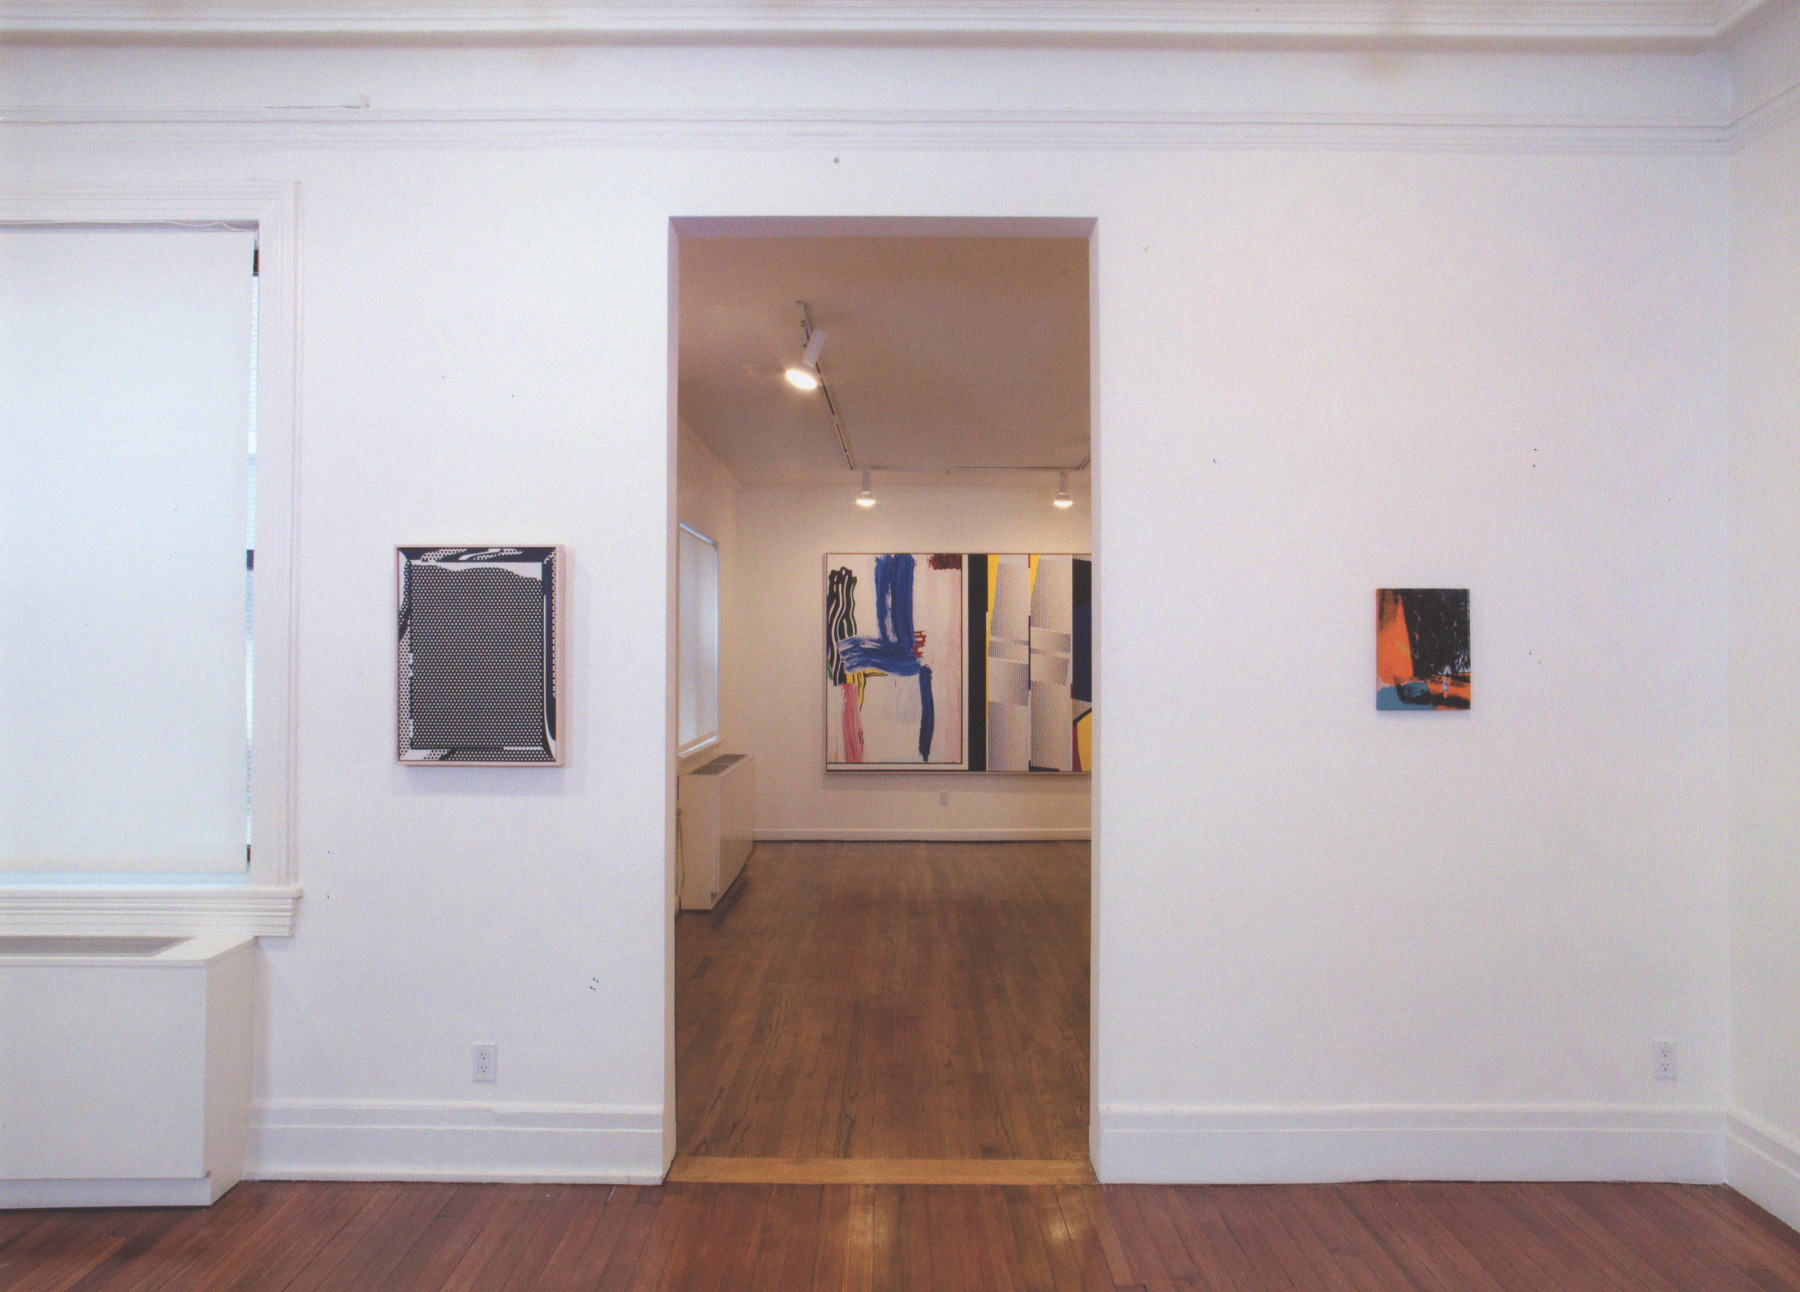 Installation view, Reflected in the Mirror There Was a Shadow, 18 EAST 77